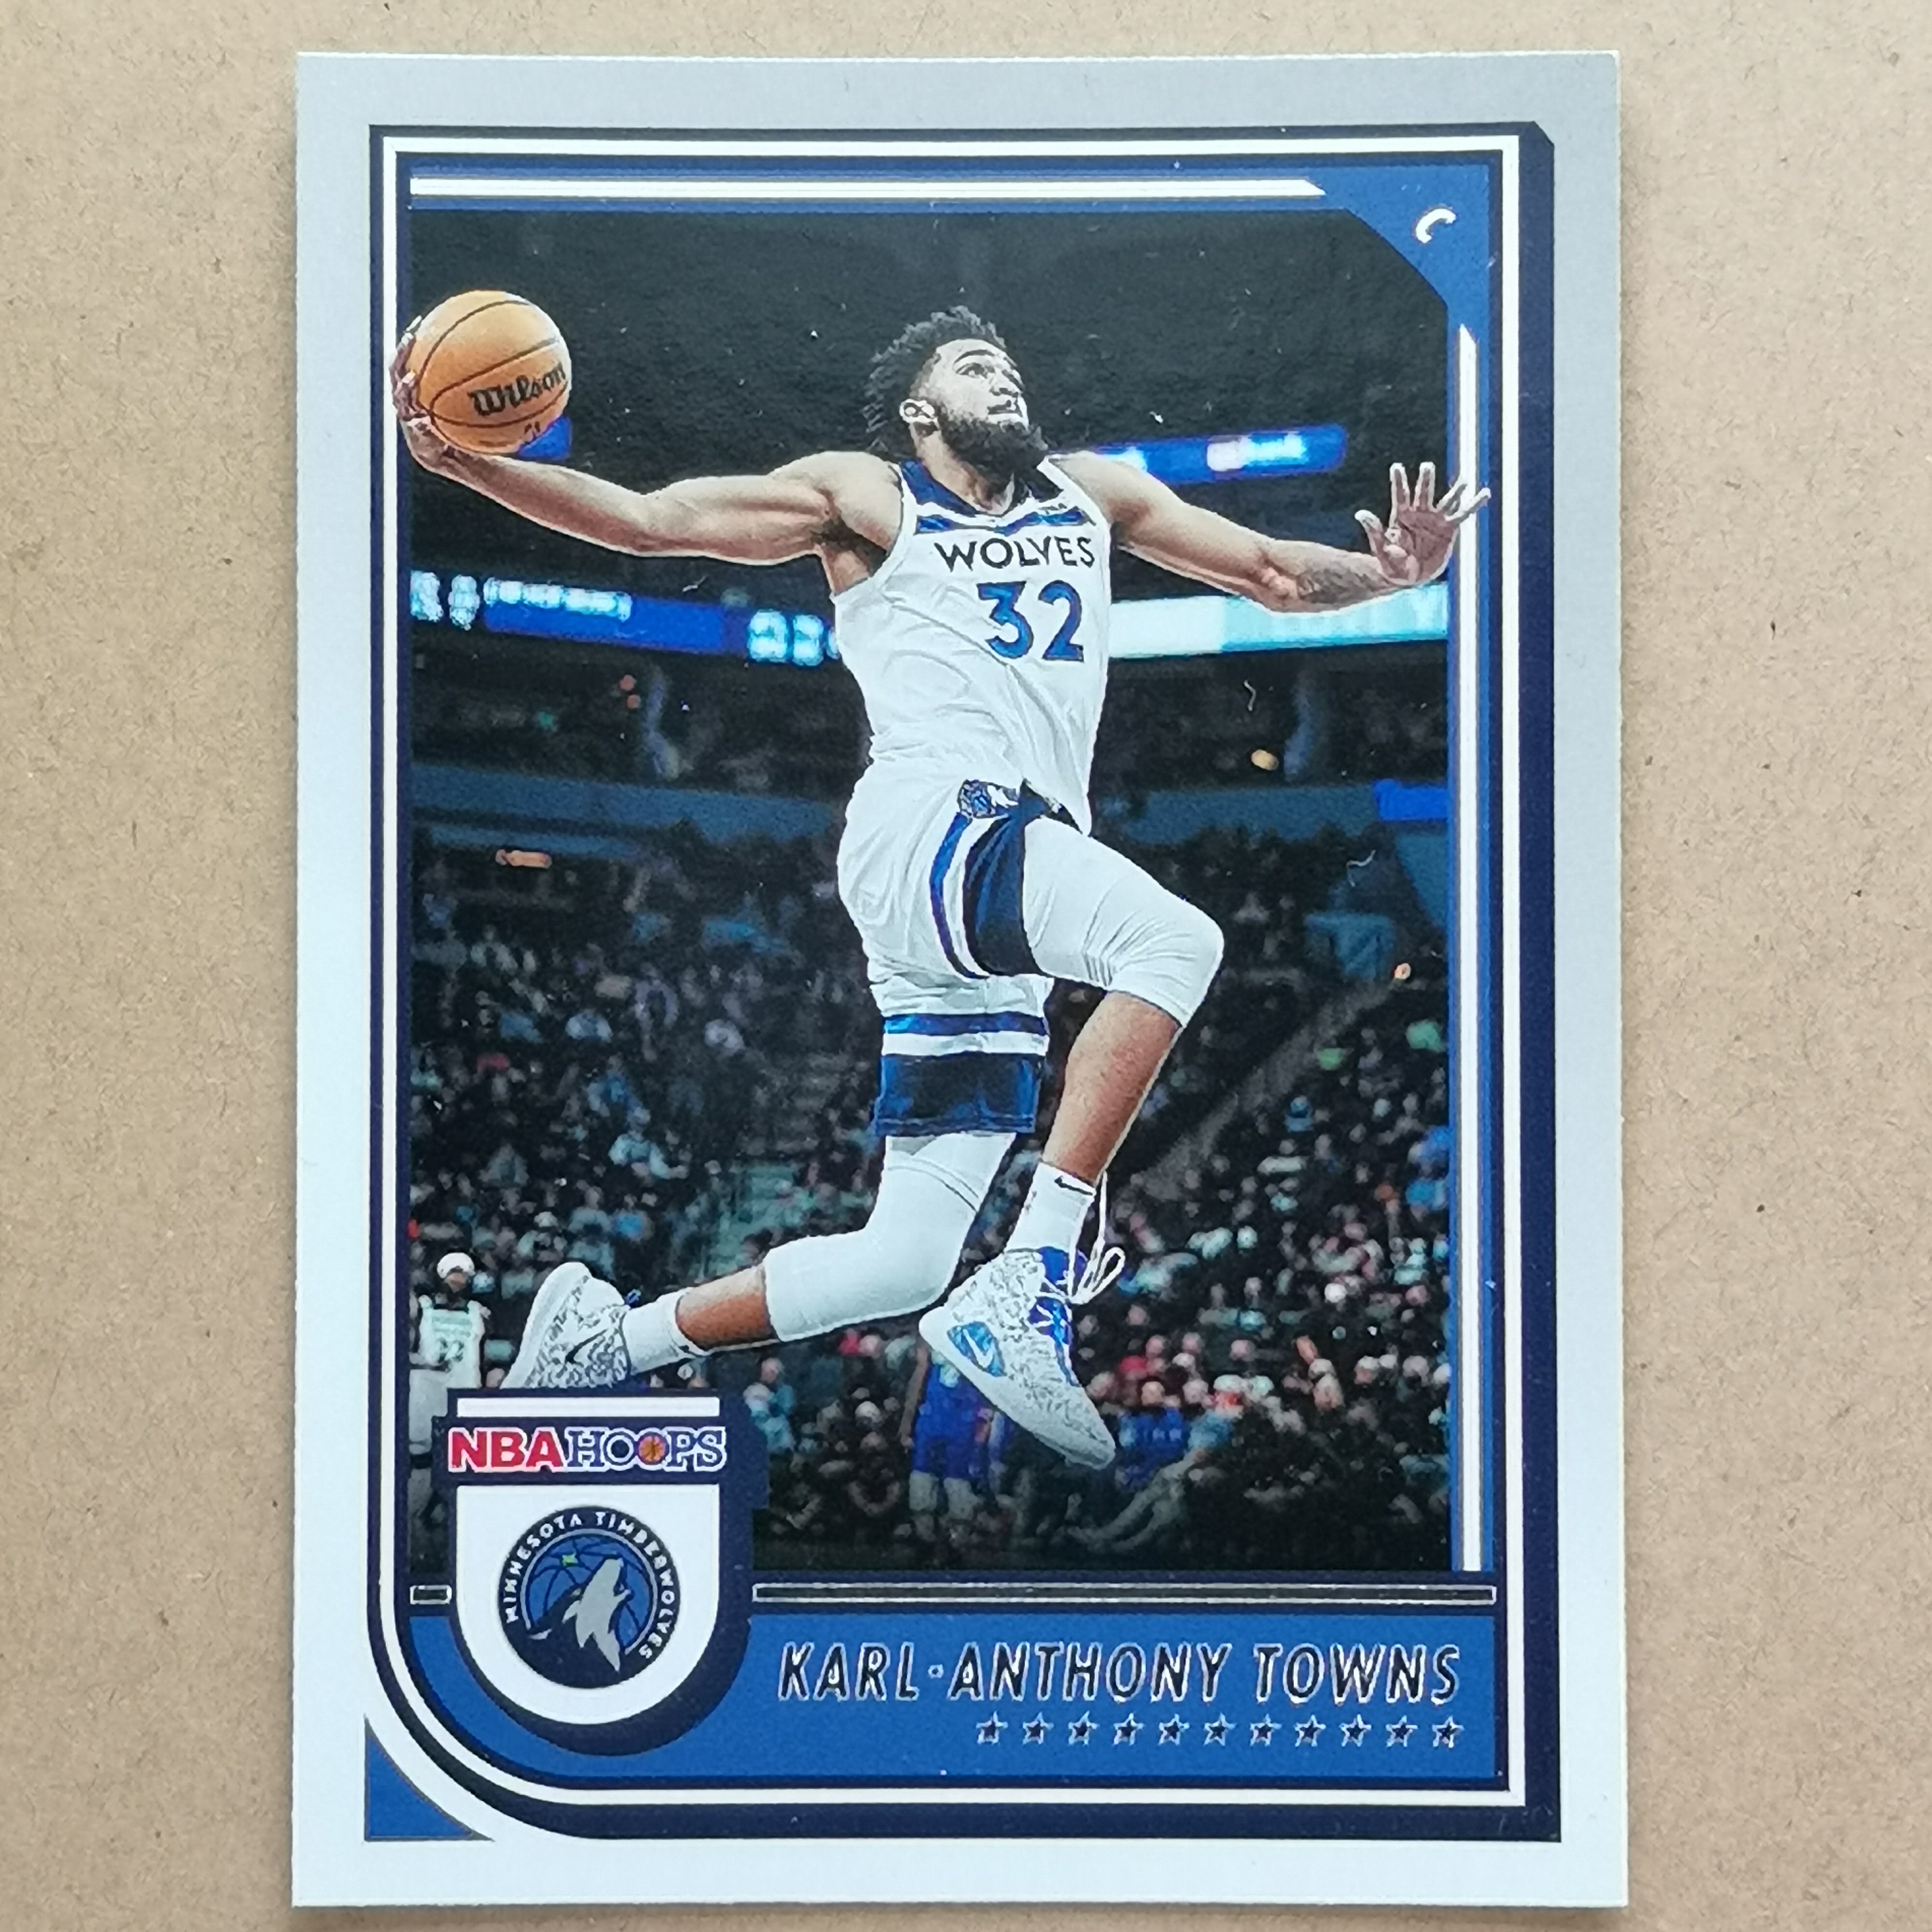 2022-23 Panini Hoops Karl Anthony Towns 【棠】森林狼 No.195